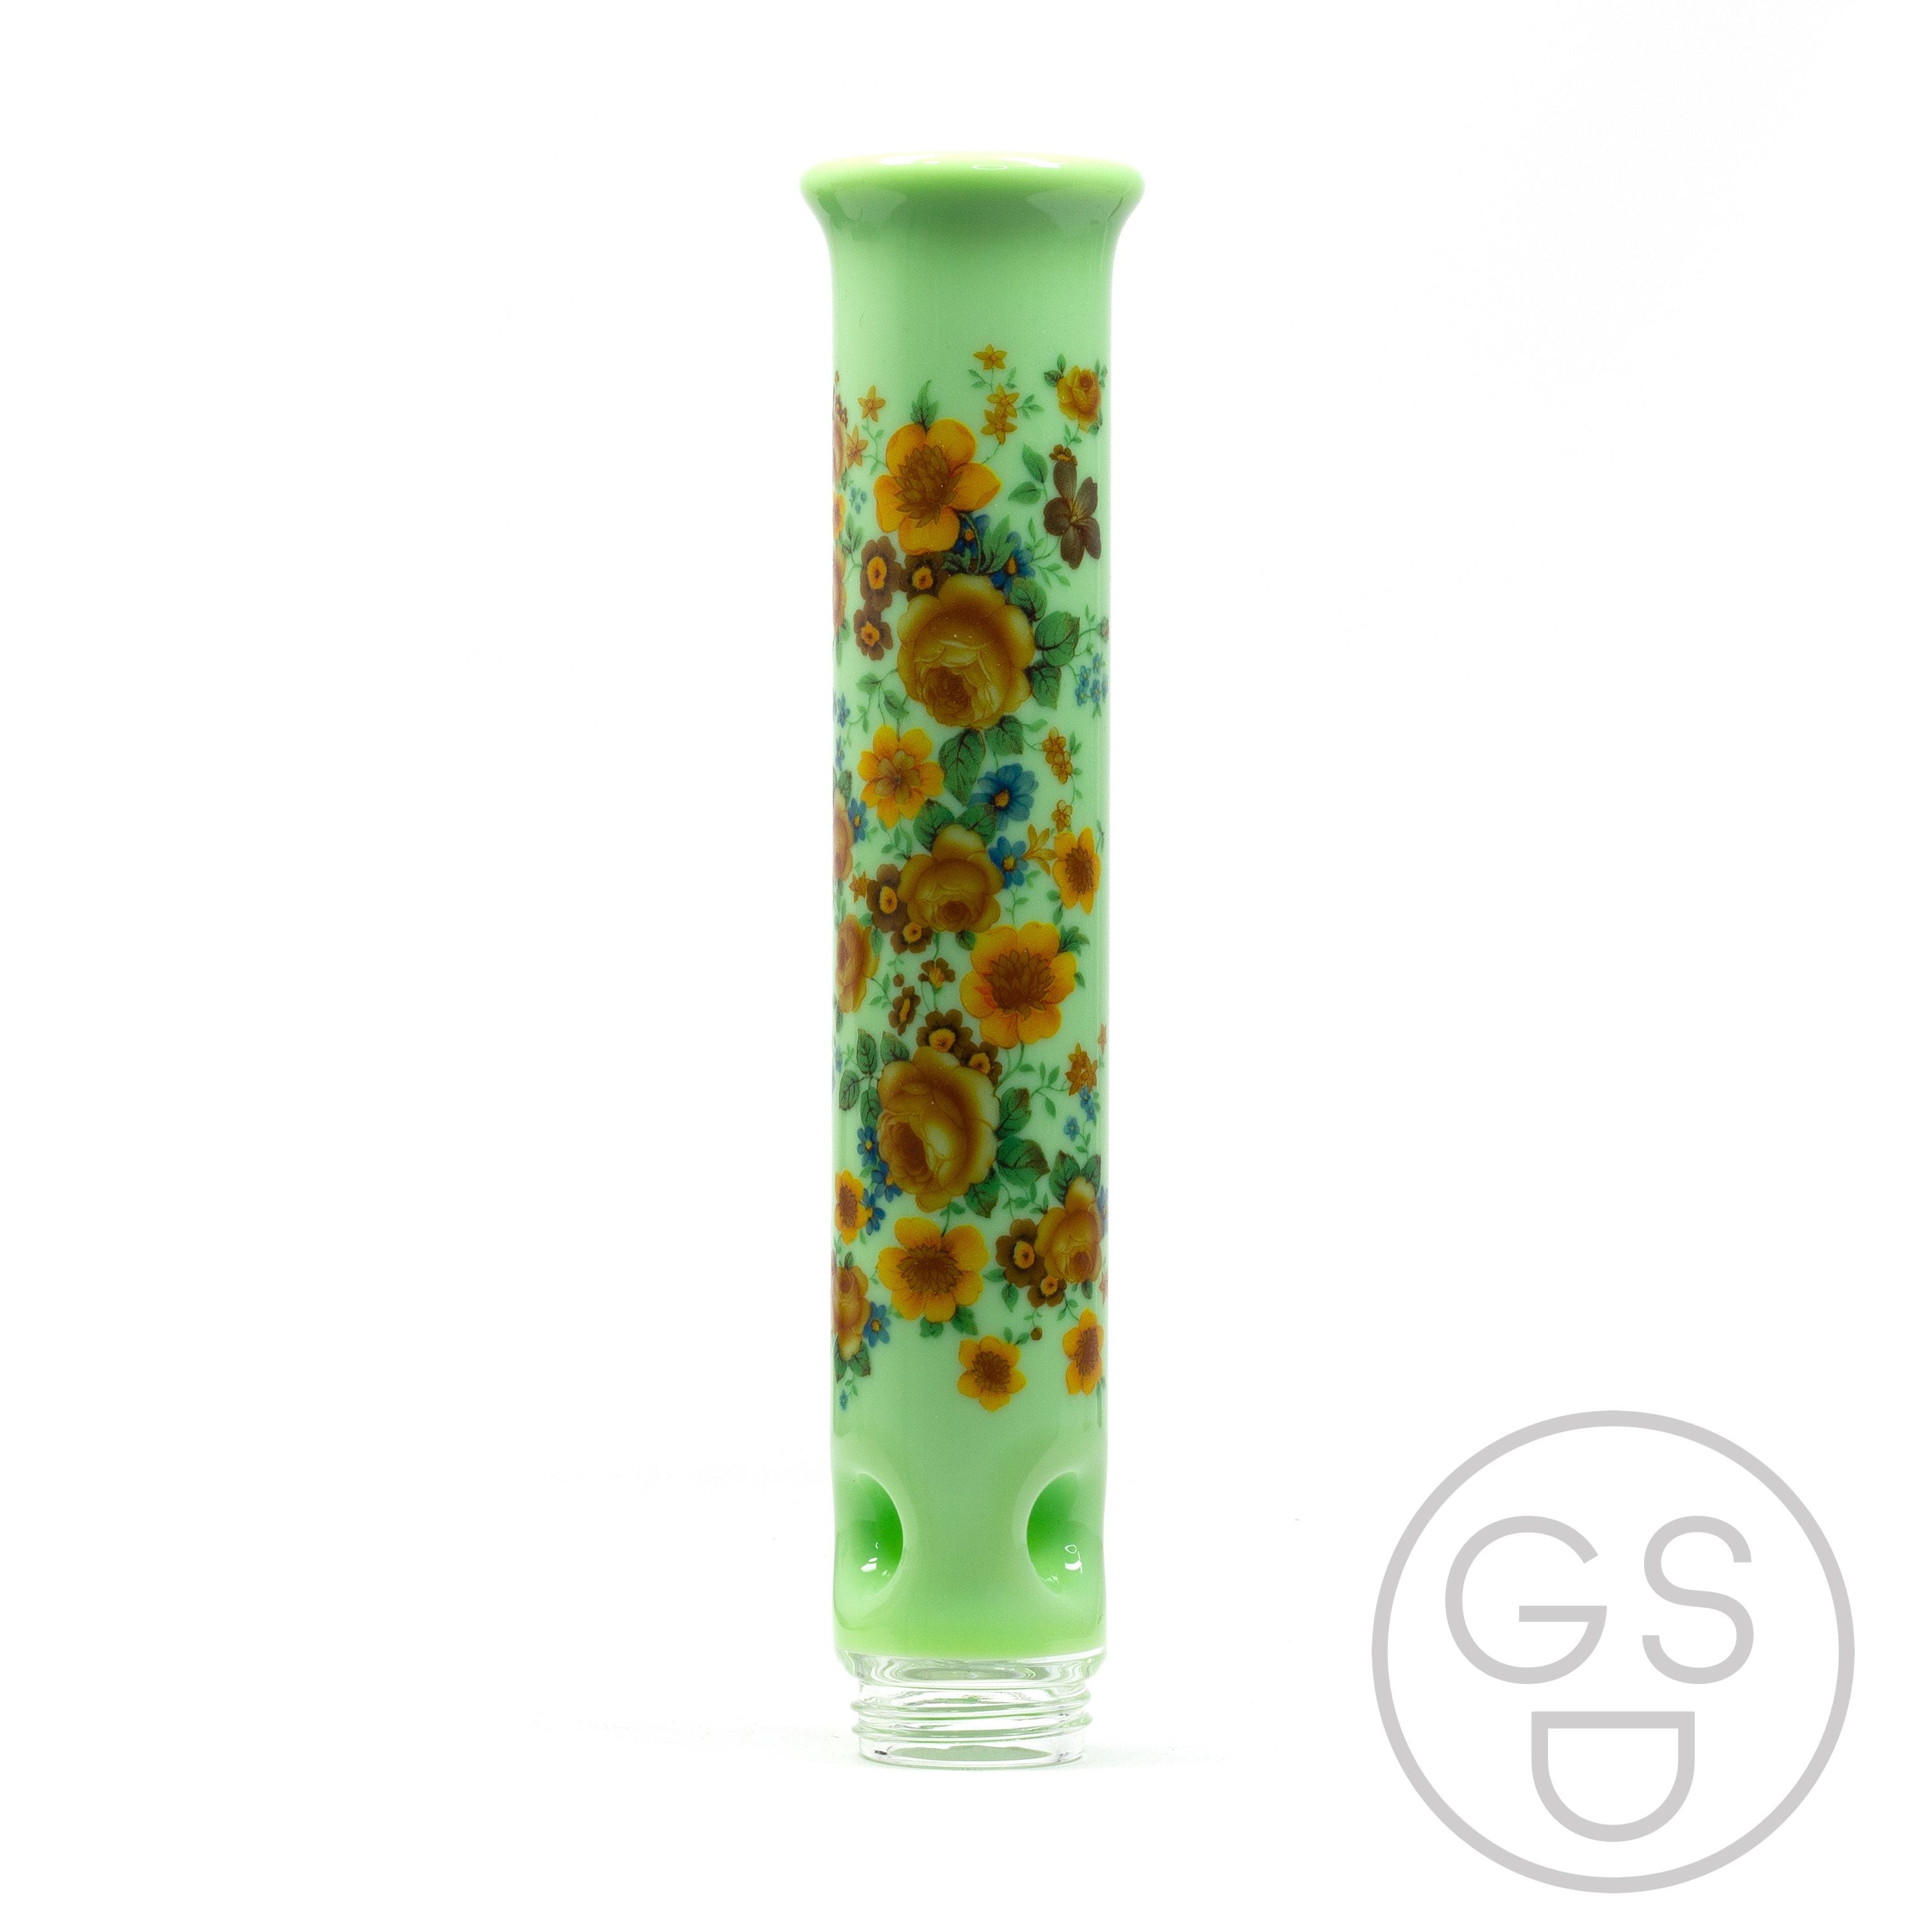 Prism Modular Waterpipe Tall Mouthpiece - Vintage Floral / Key Lime